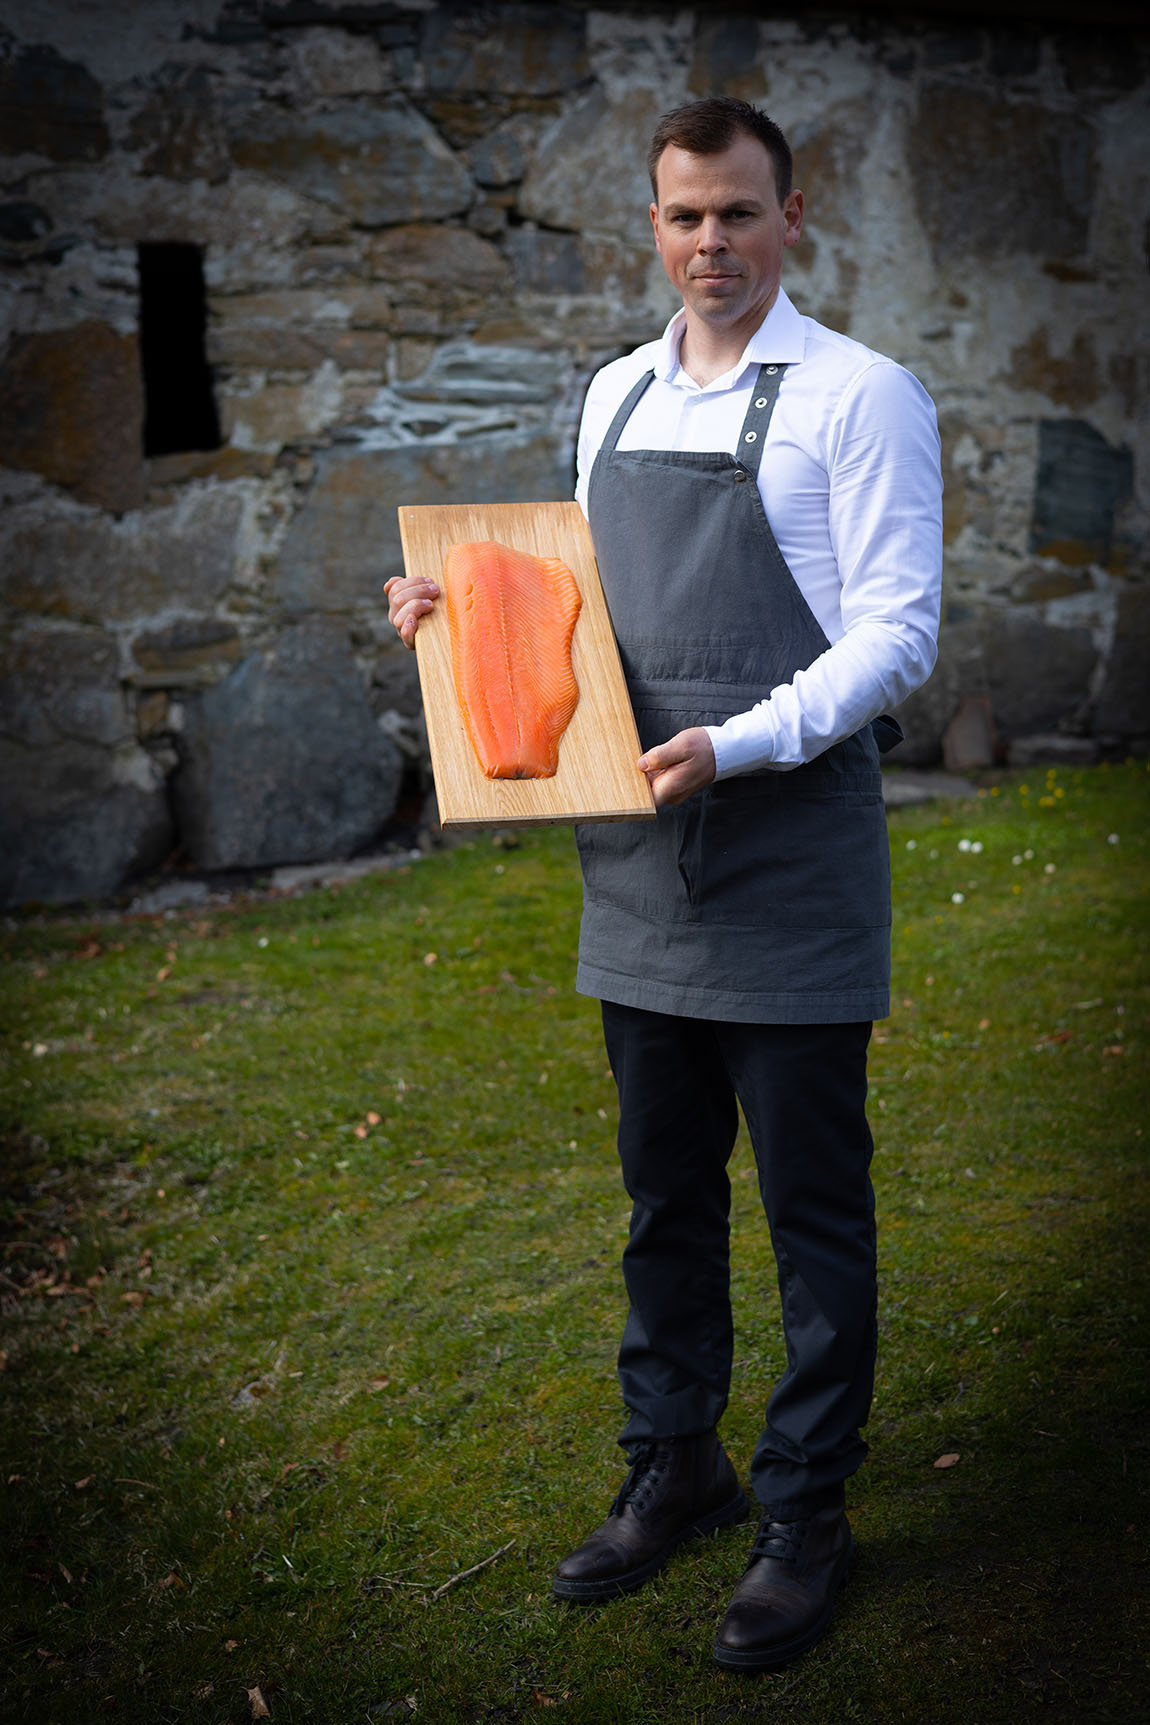 Kloster Laks: A nearly royal salmon